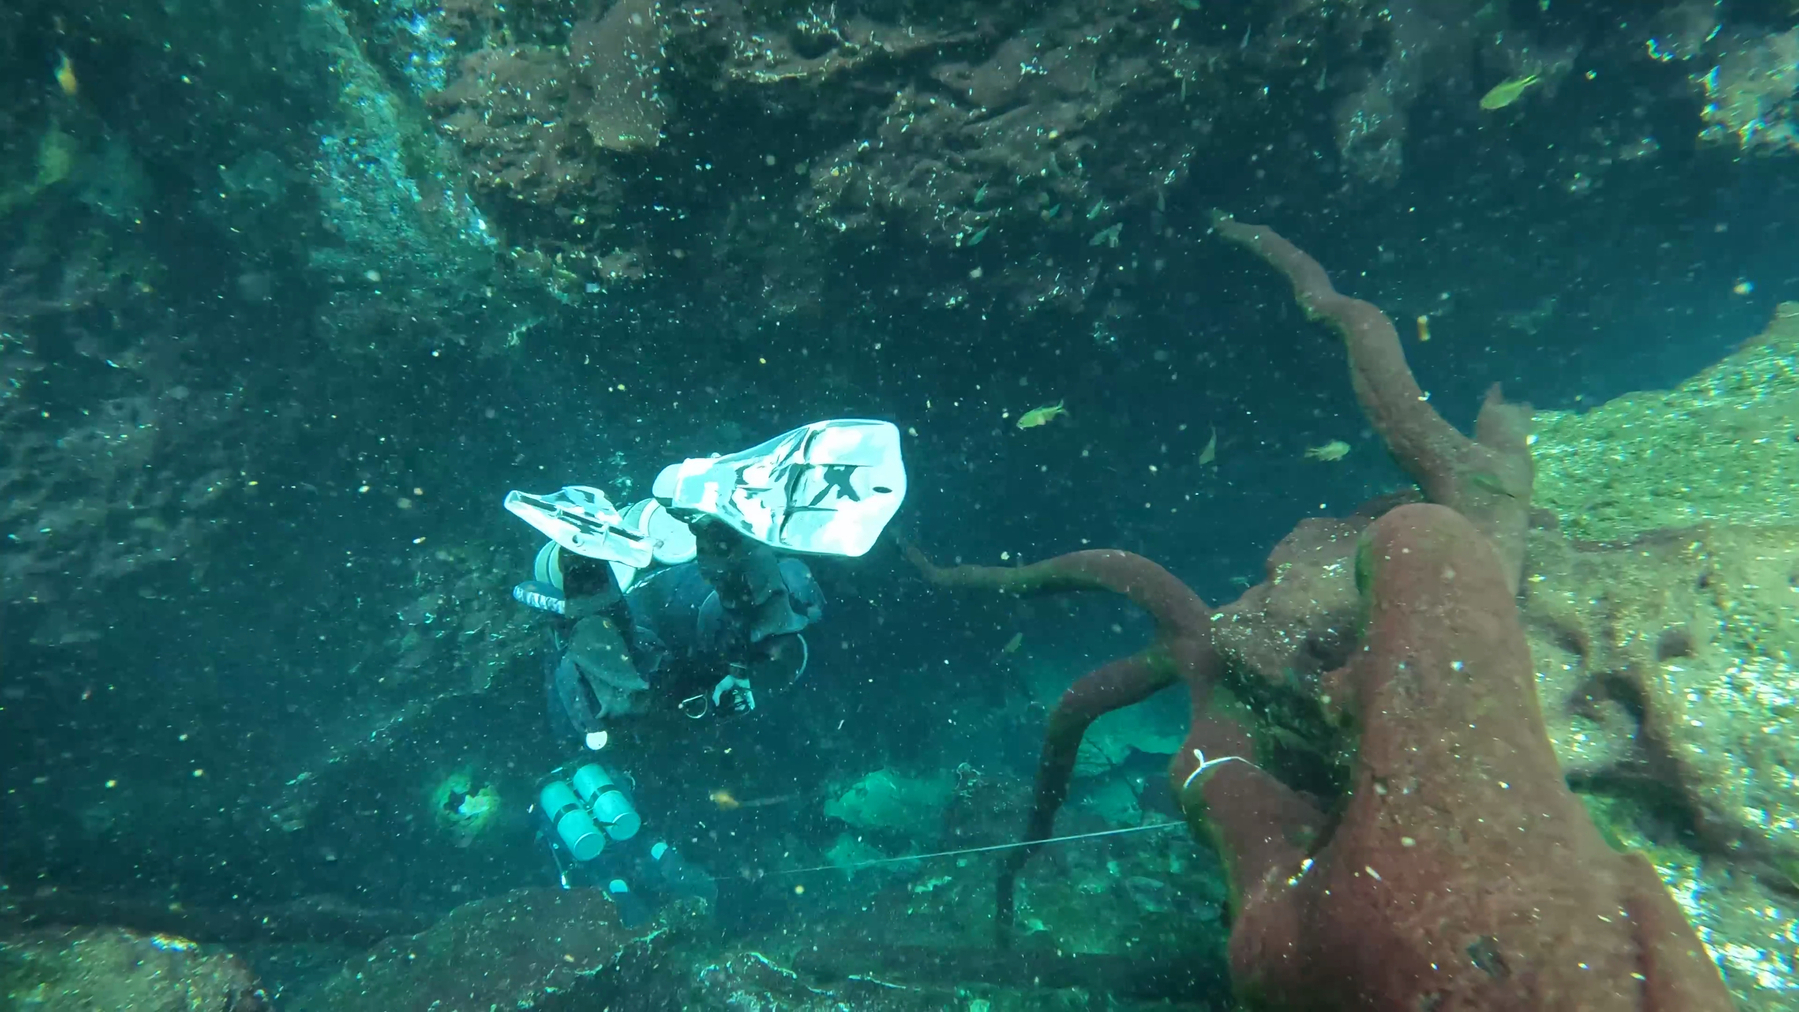 Two divers descend into the an underwater cave system, their gruideline tied to a nearby fallen tree branch, the crystal clear water casting a green blue hue on the scene.